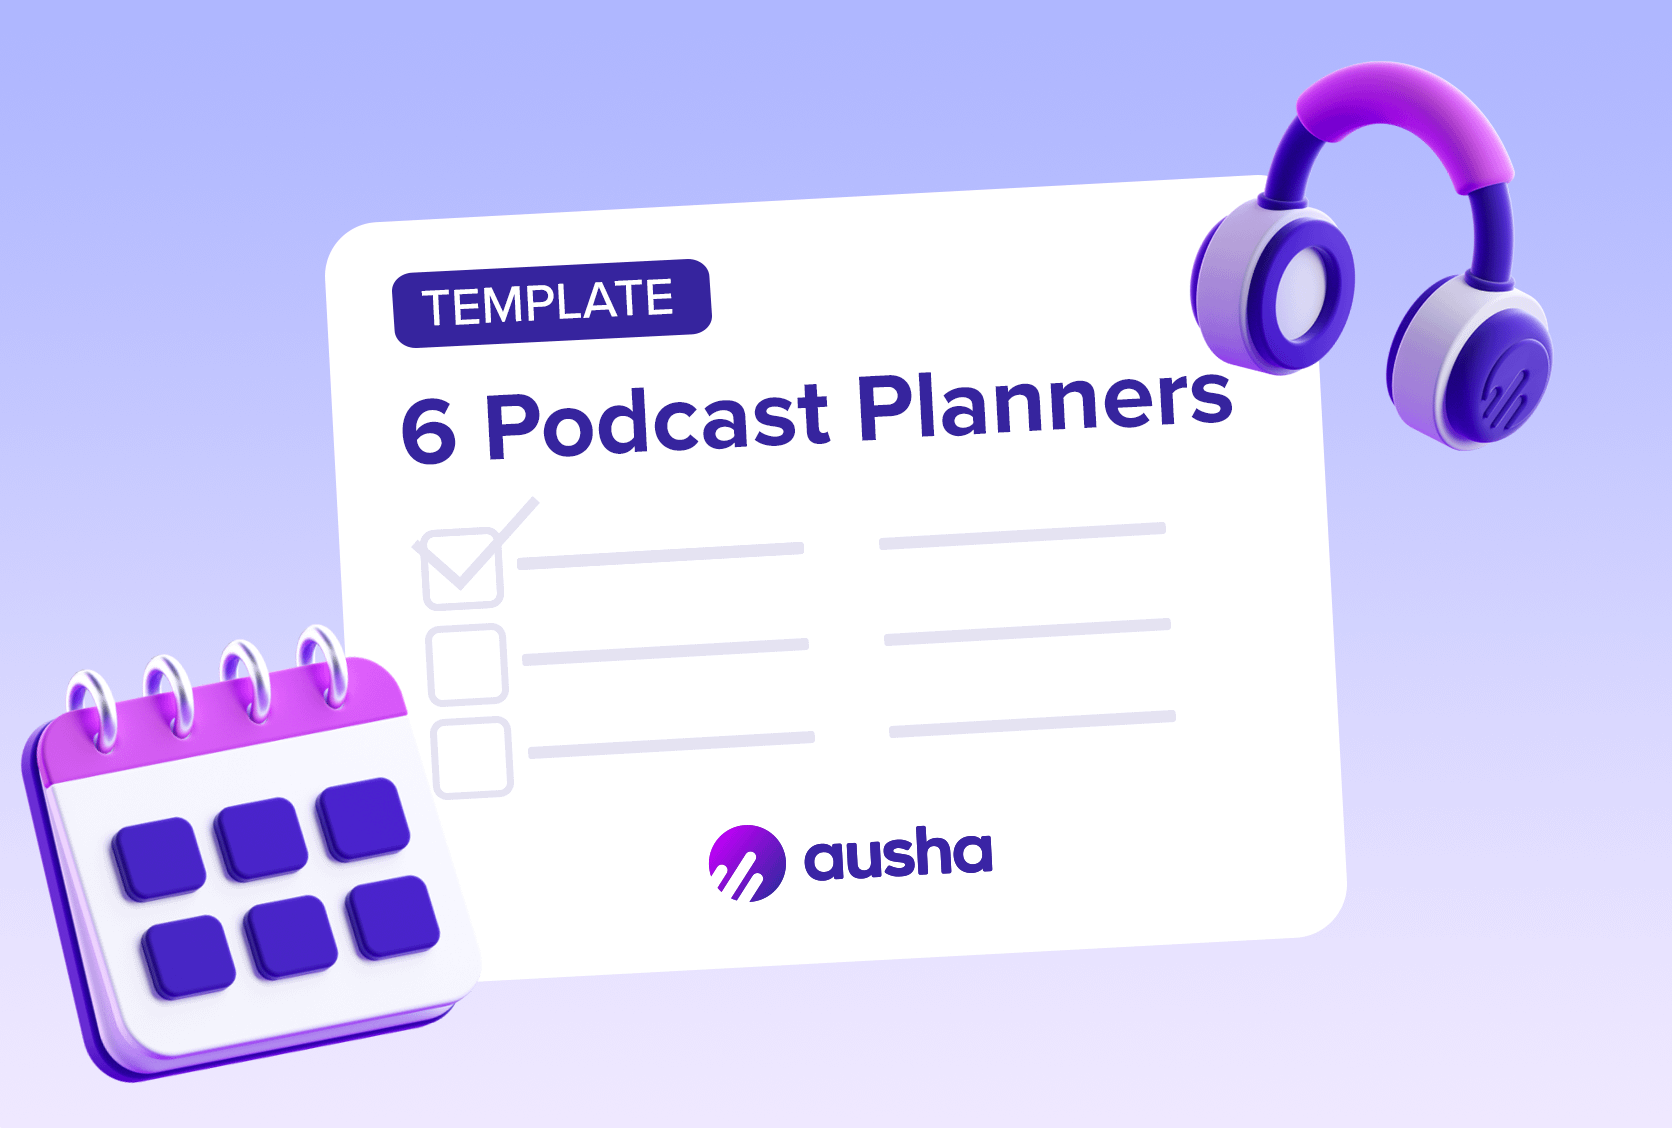 Podcast Planners Templates for your show